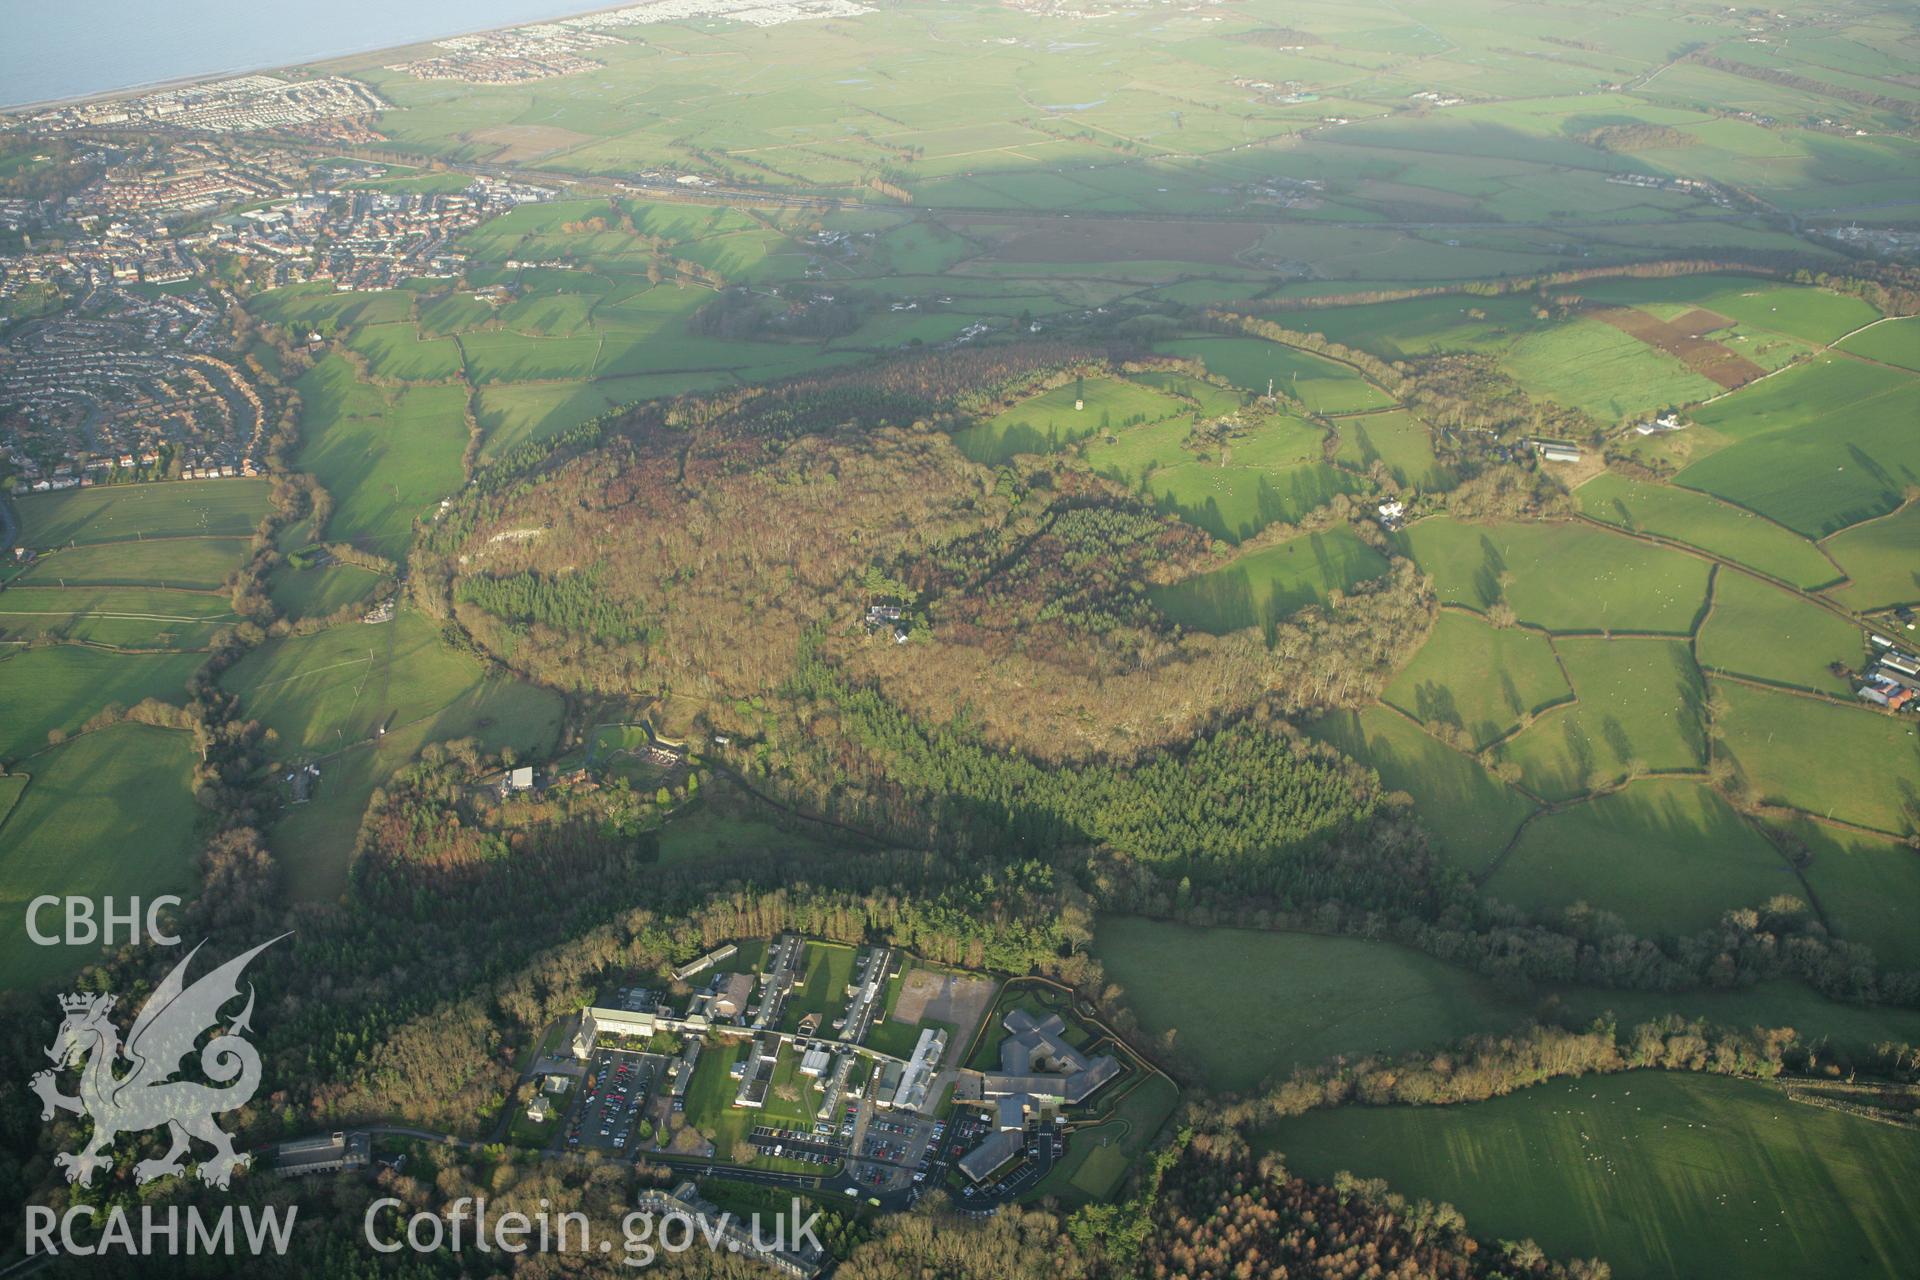 RCAHMW colour oblique aerial photograph of Abergele Hospital. Taken on 10 December 2009 by Toby Driver